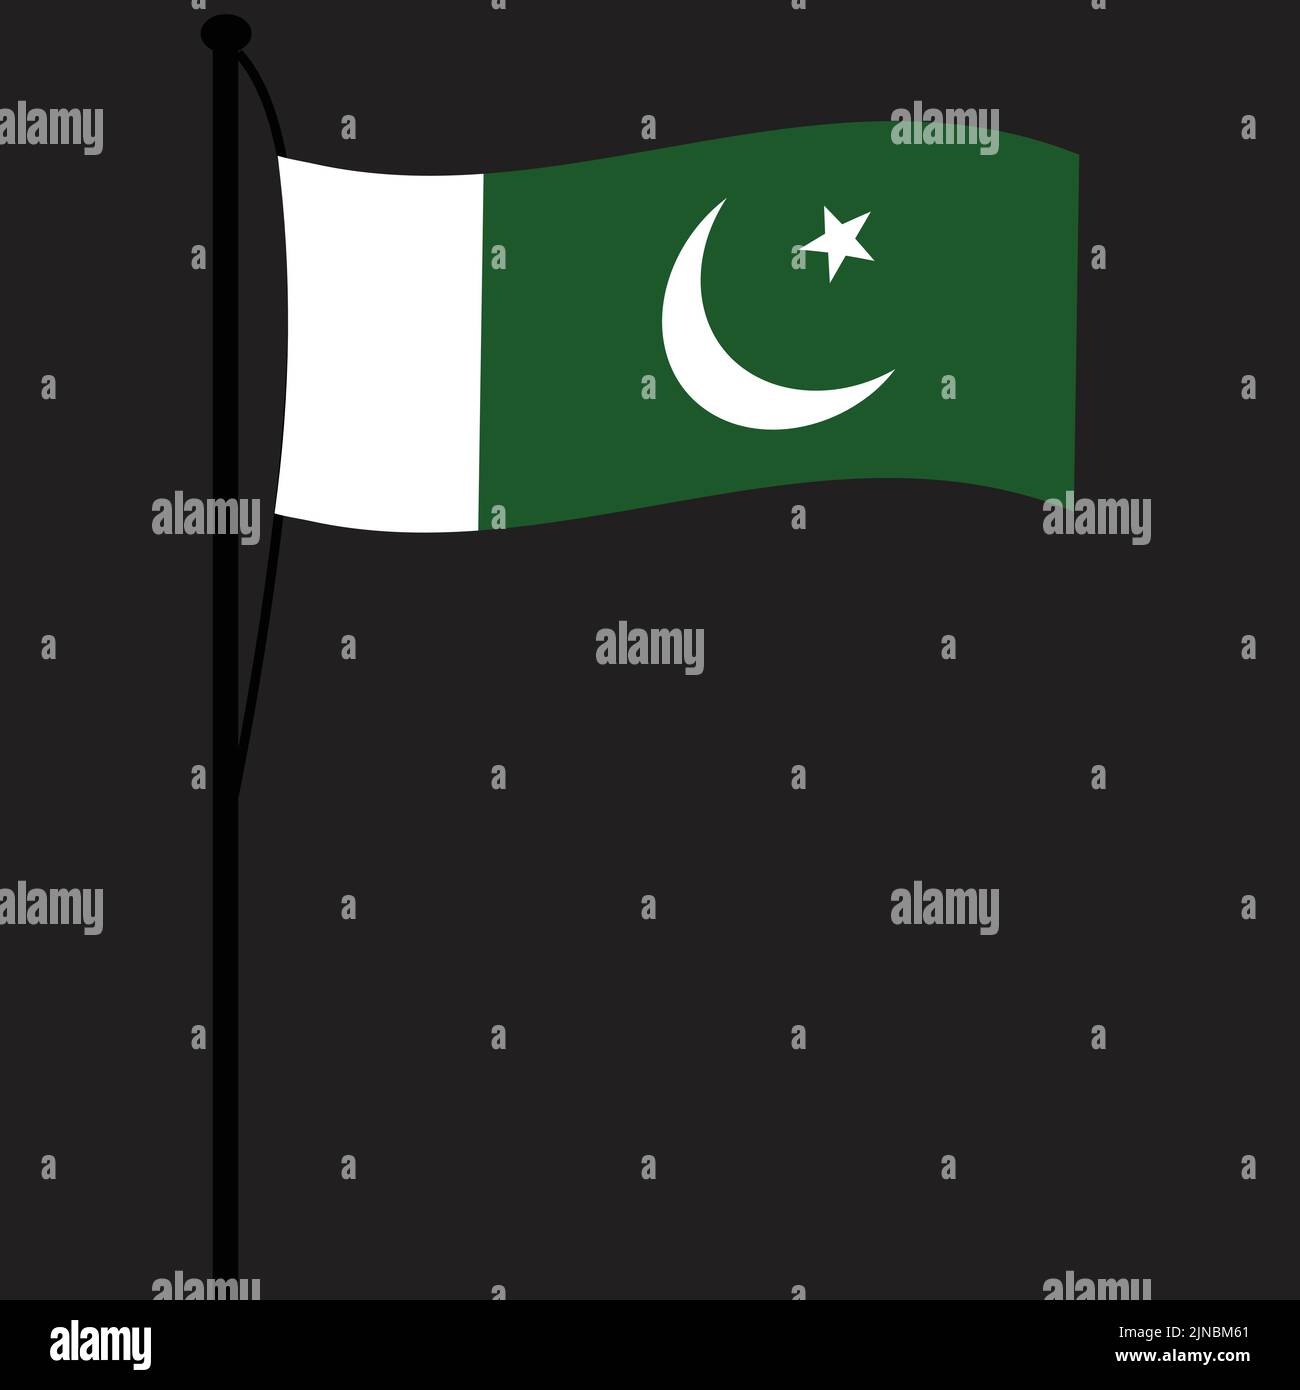 Simple vector design illustration of the Pakistan flag with theme colors of white and green. Star and crescent on the flag. hanging from a black pole Stock Vector